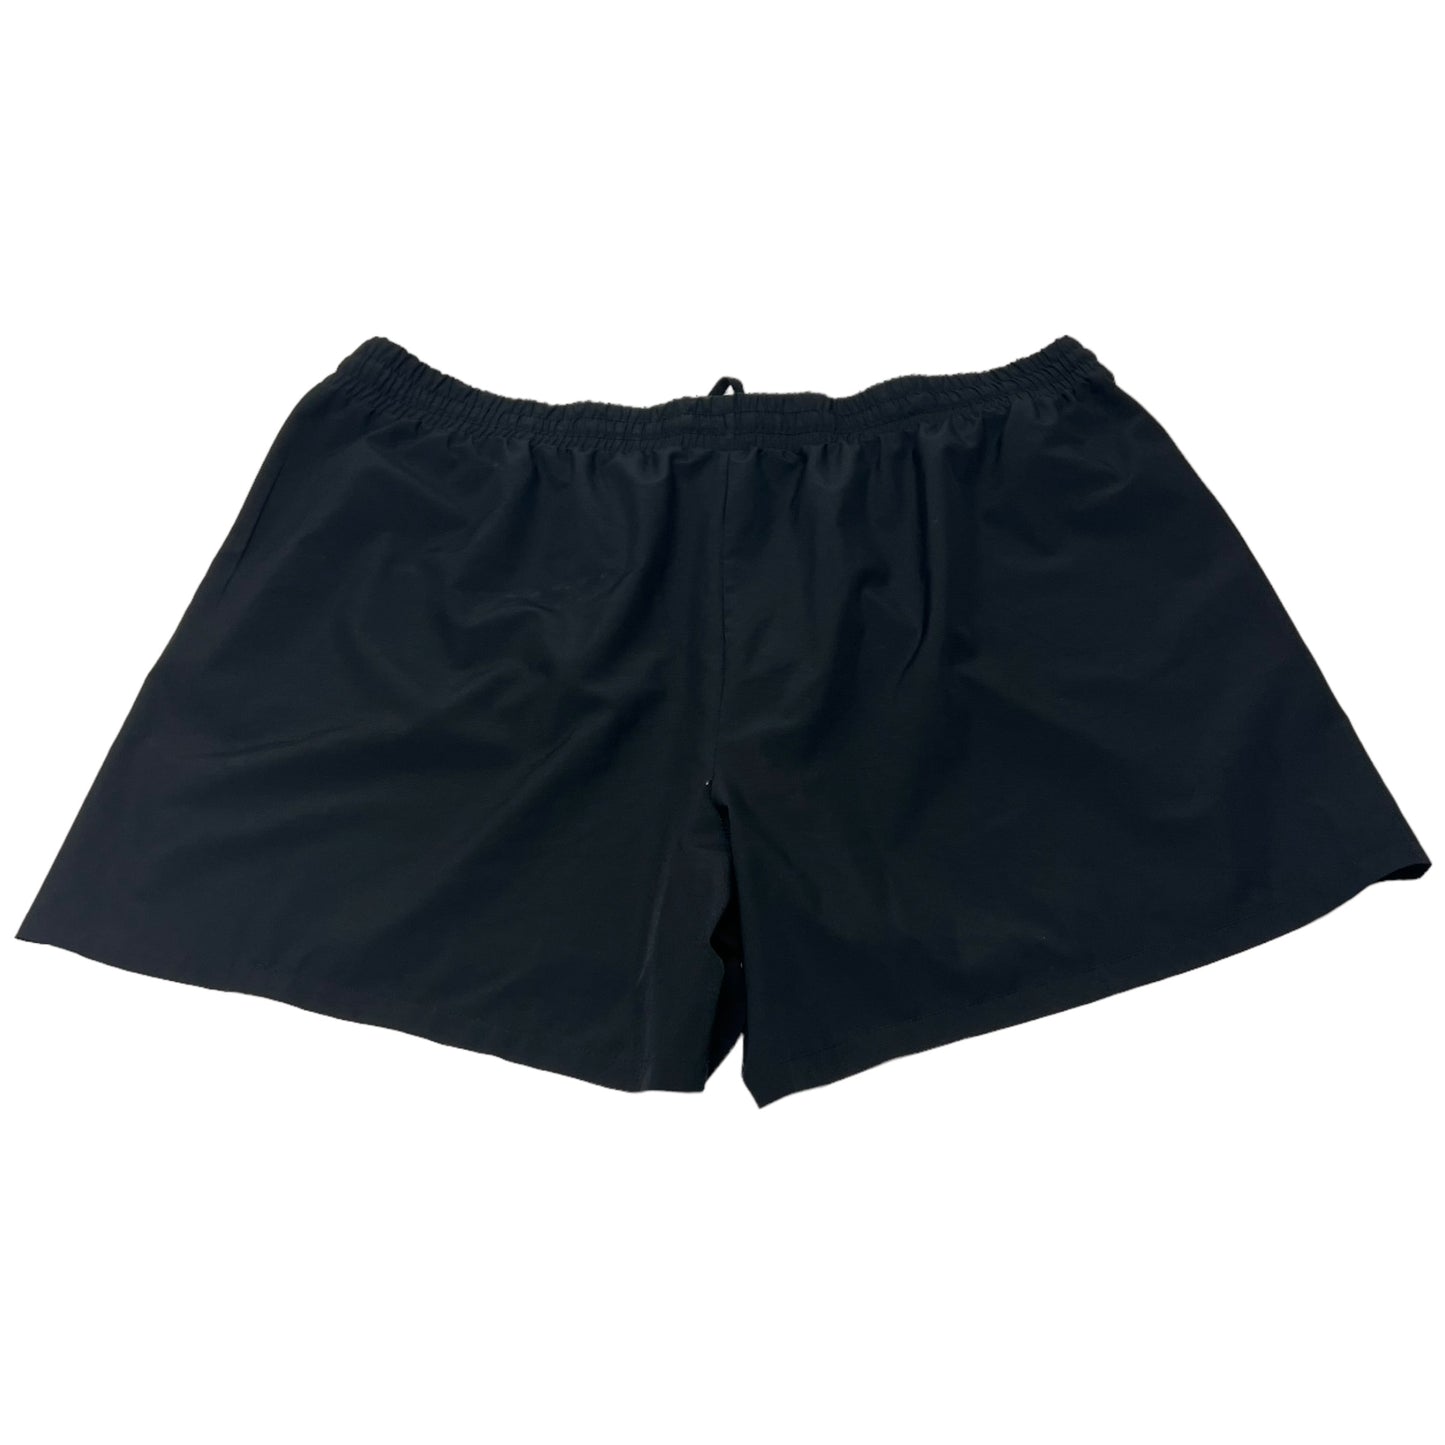 Athletic Shorts By Rxb  Size: 3x